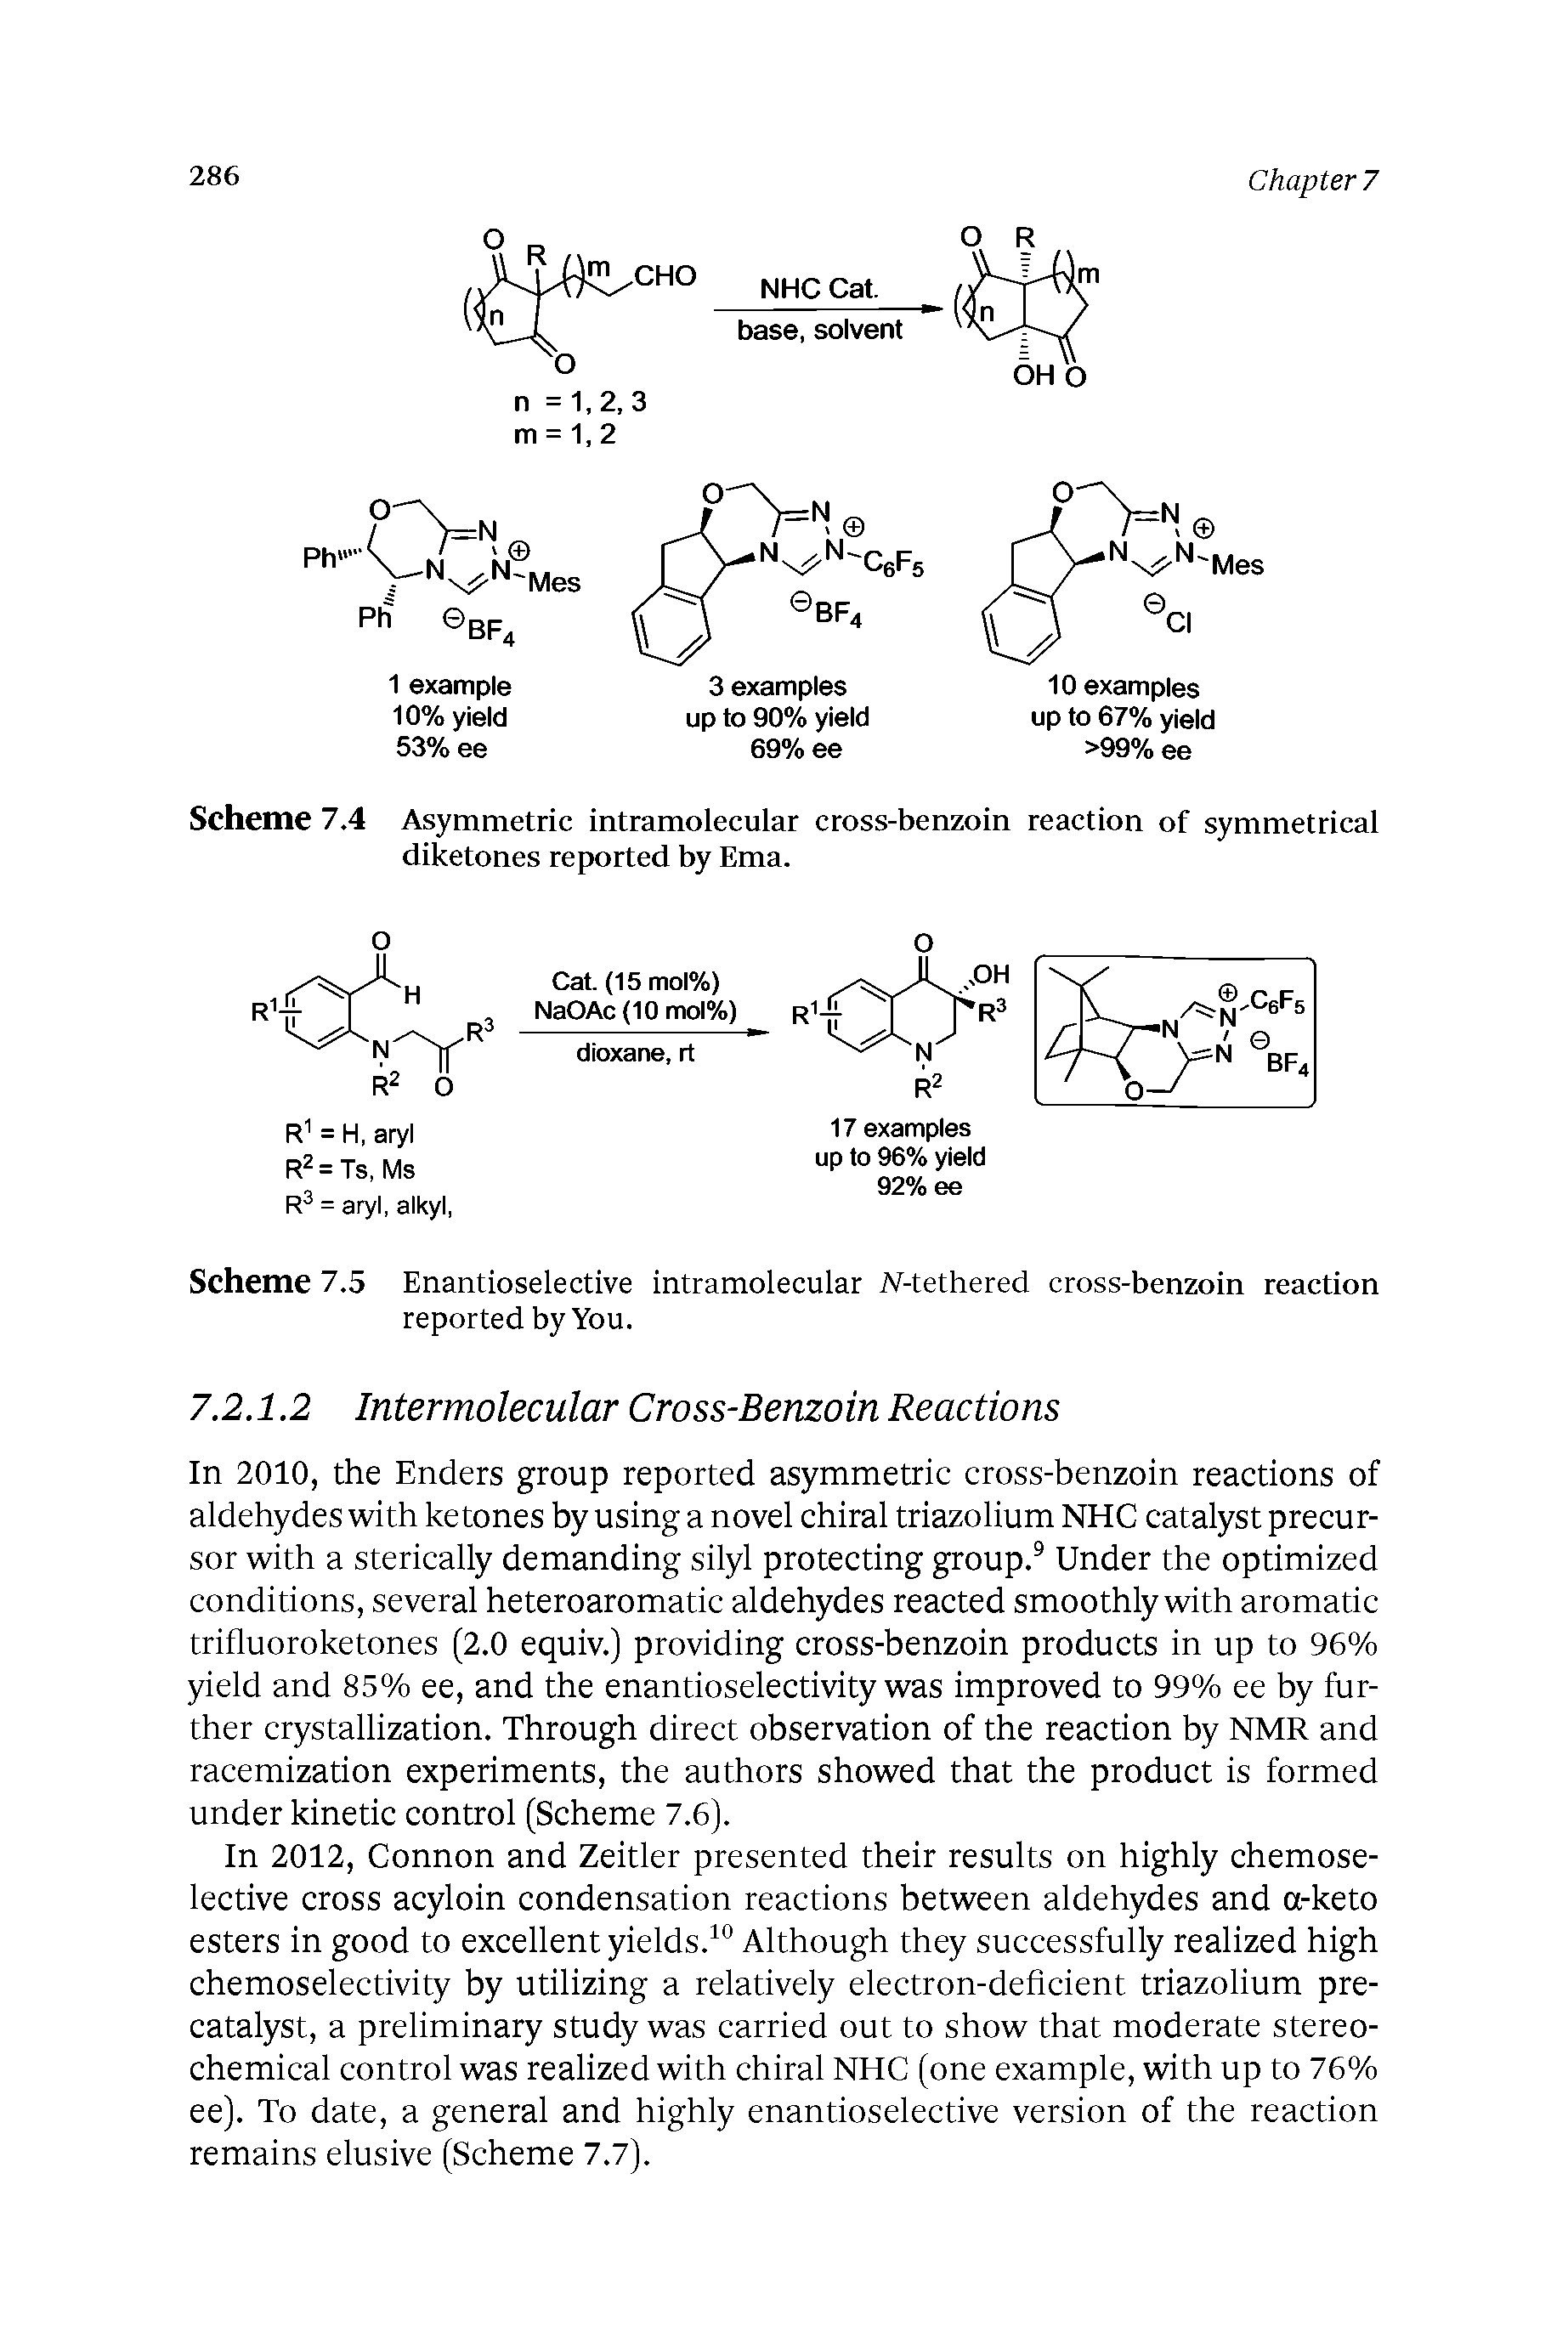 Scheme 7.5 Enantioselective intramolecular iV-tethered cross-benzoin reaction reported by You.